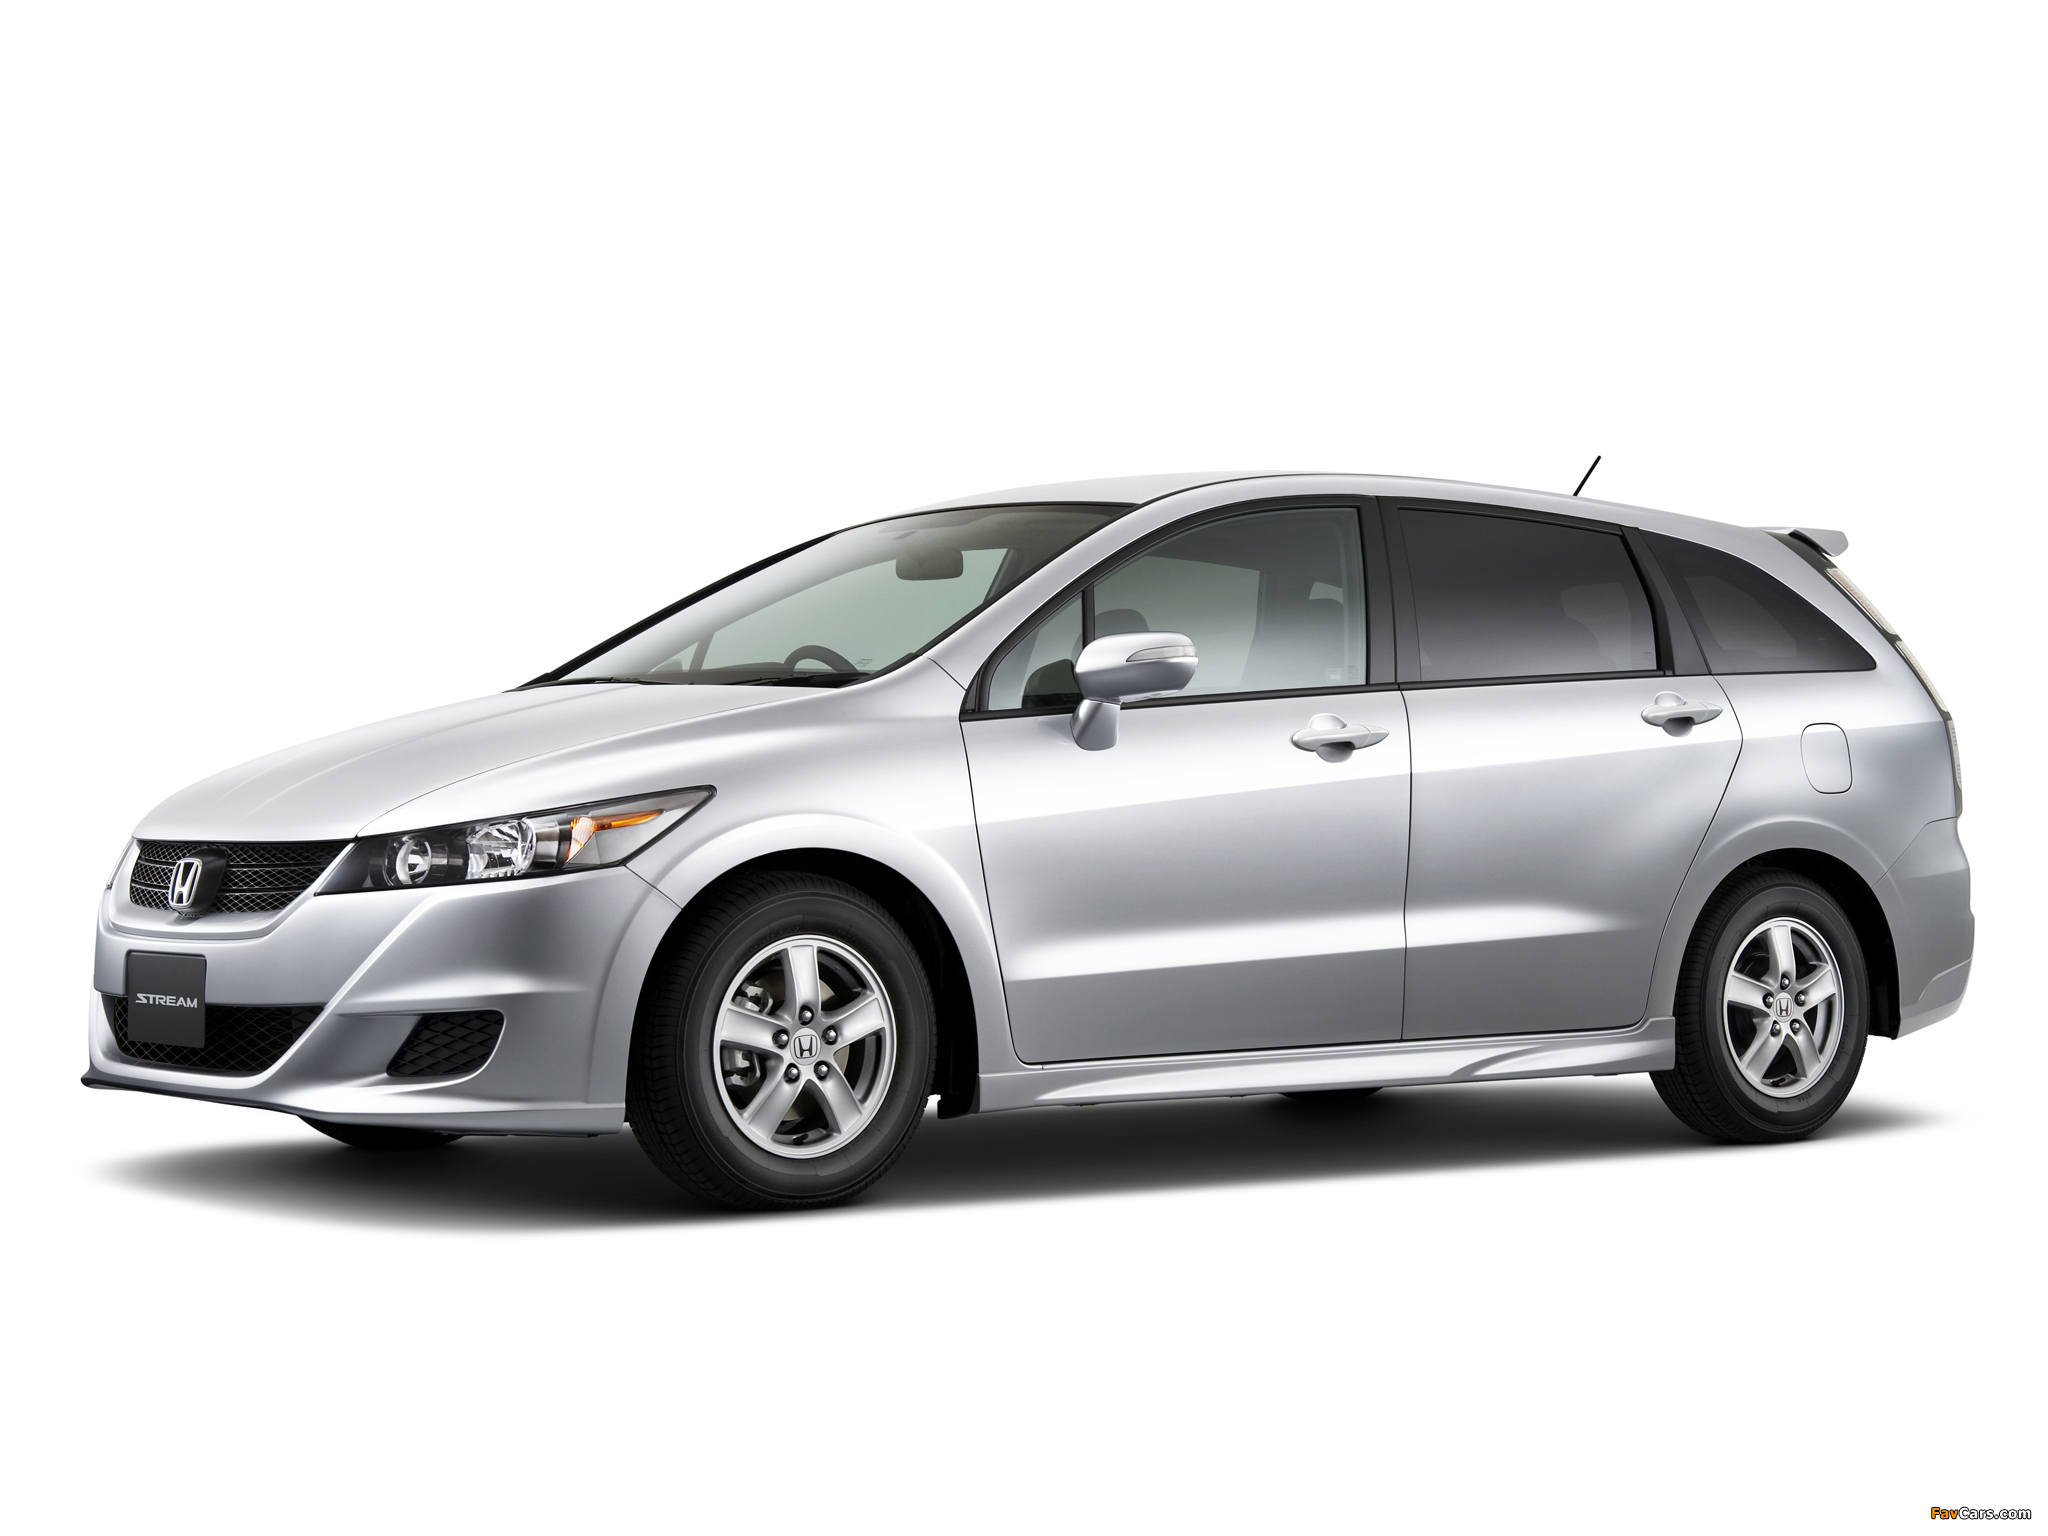 Honda Stream Sporty Edition (RN6) 2011 pictures (2048 x 1536)